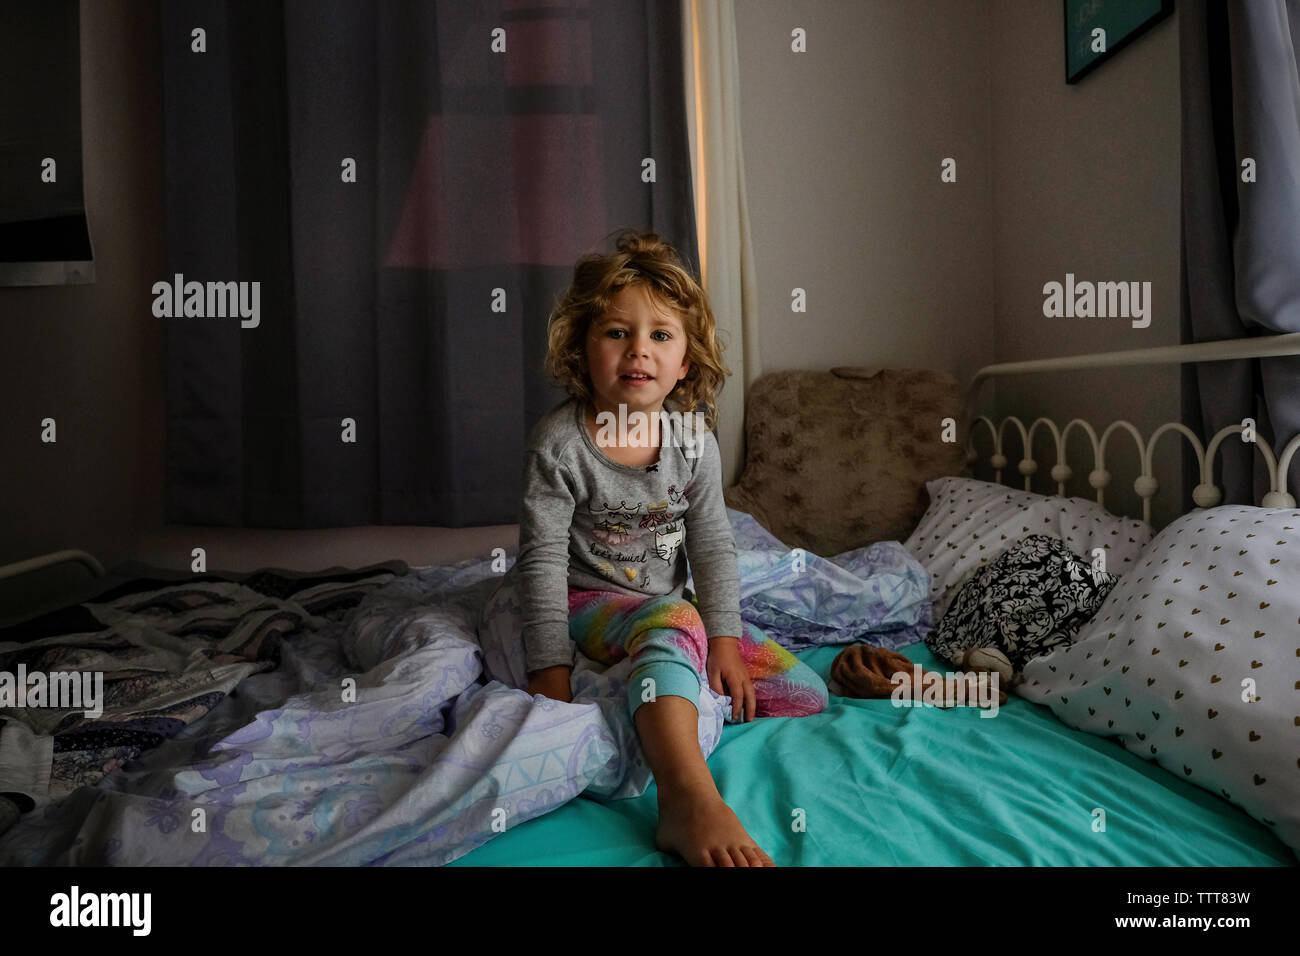 Portrait of cute girl sitting on bed at home Banque D'Images